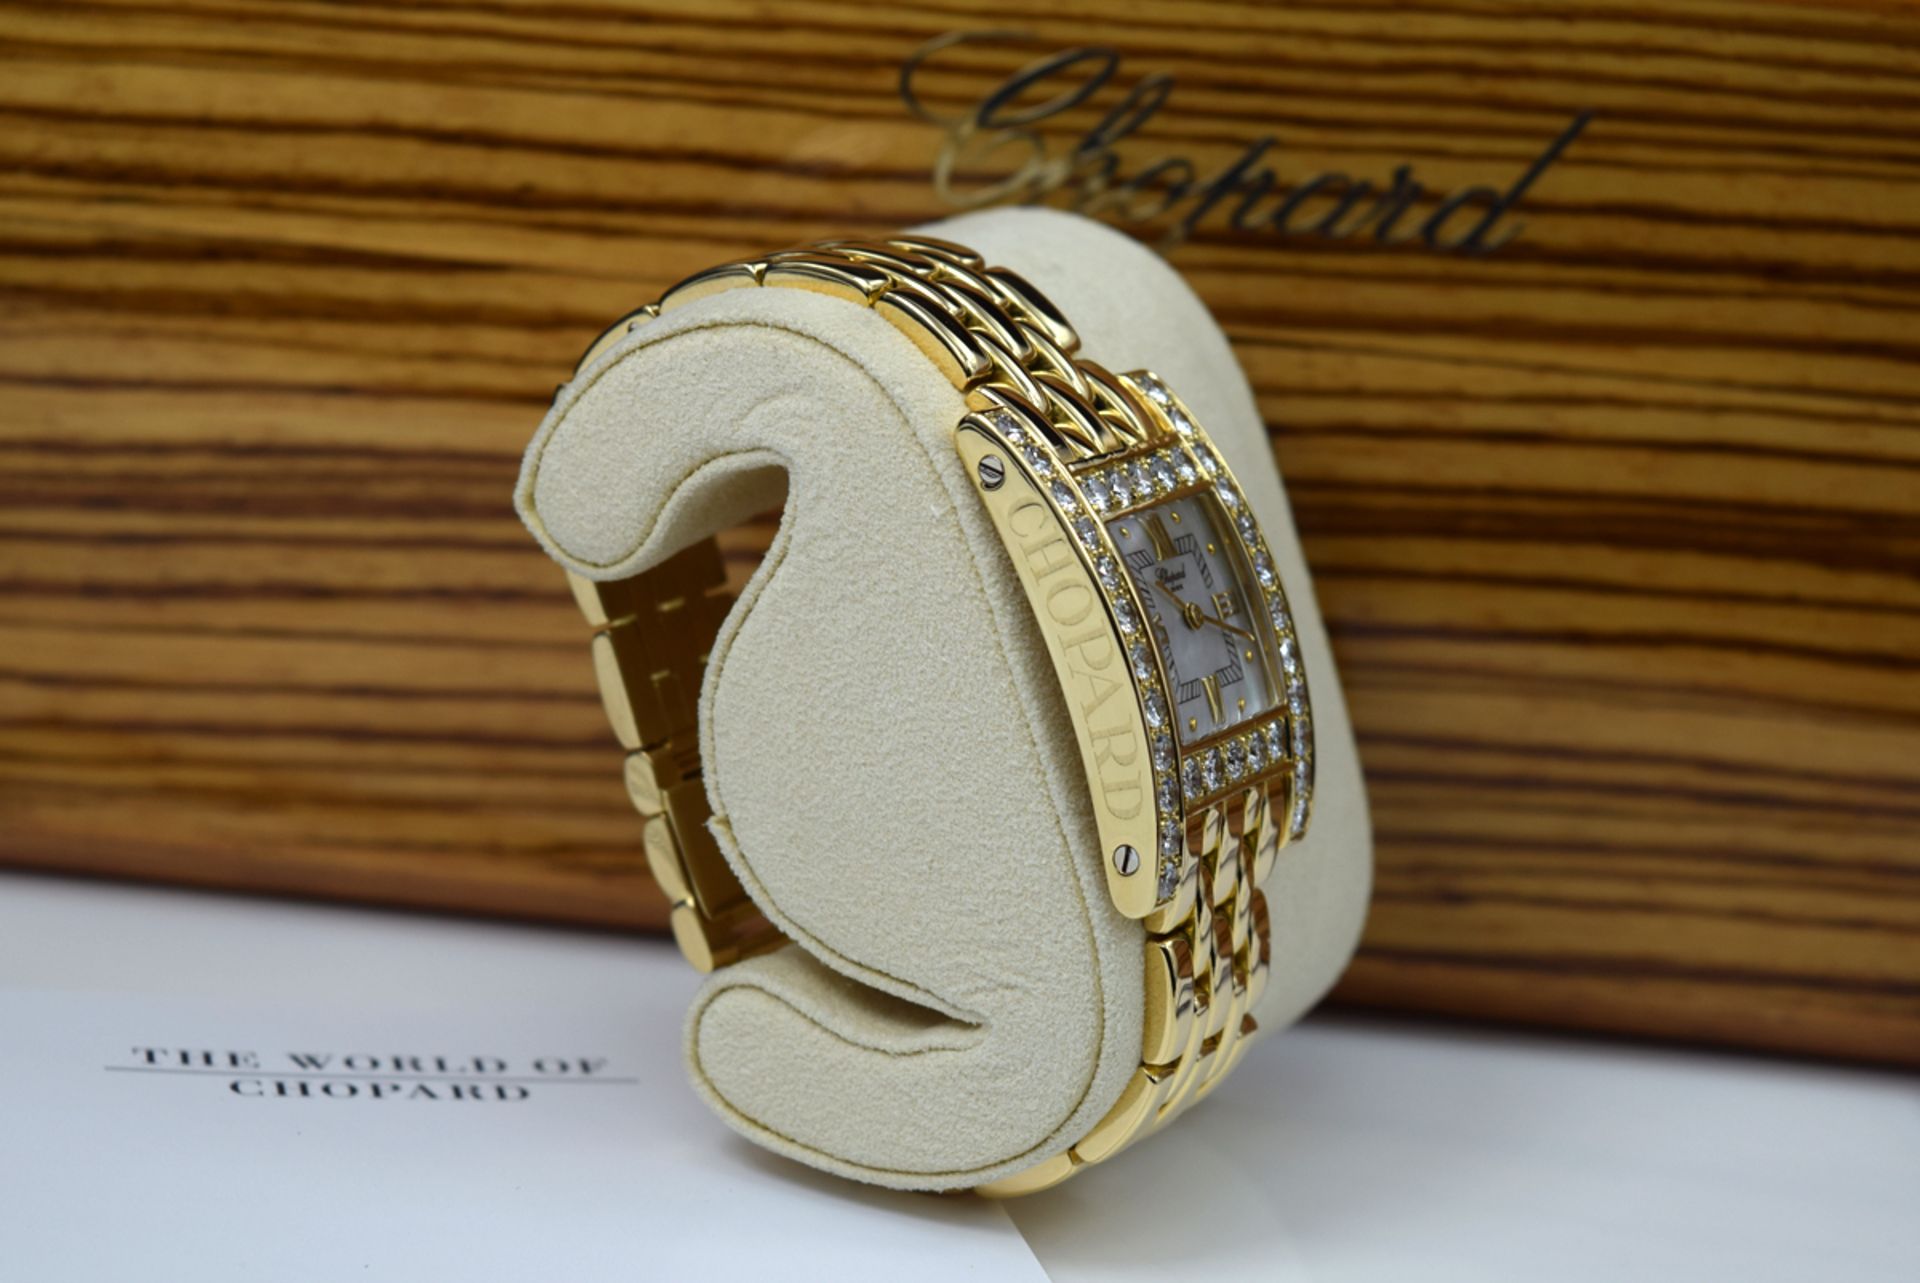 *WOW* Chopard Diamond 'H' / Your Hour 18k Gold and Diamonds w/ Mother of Pearl Dial - Image 10 of 14